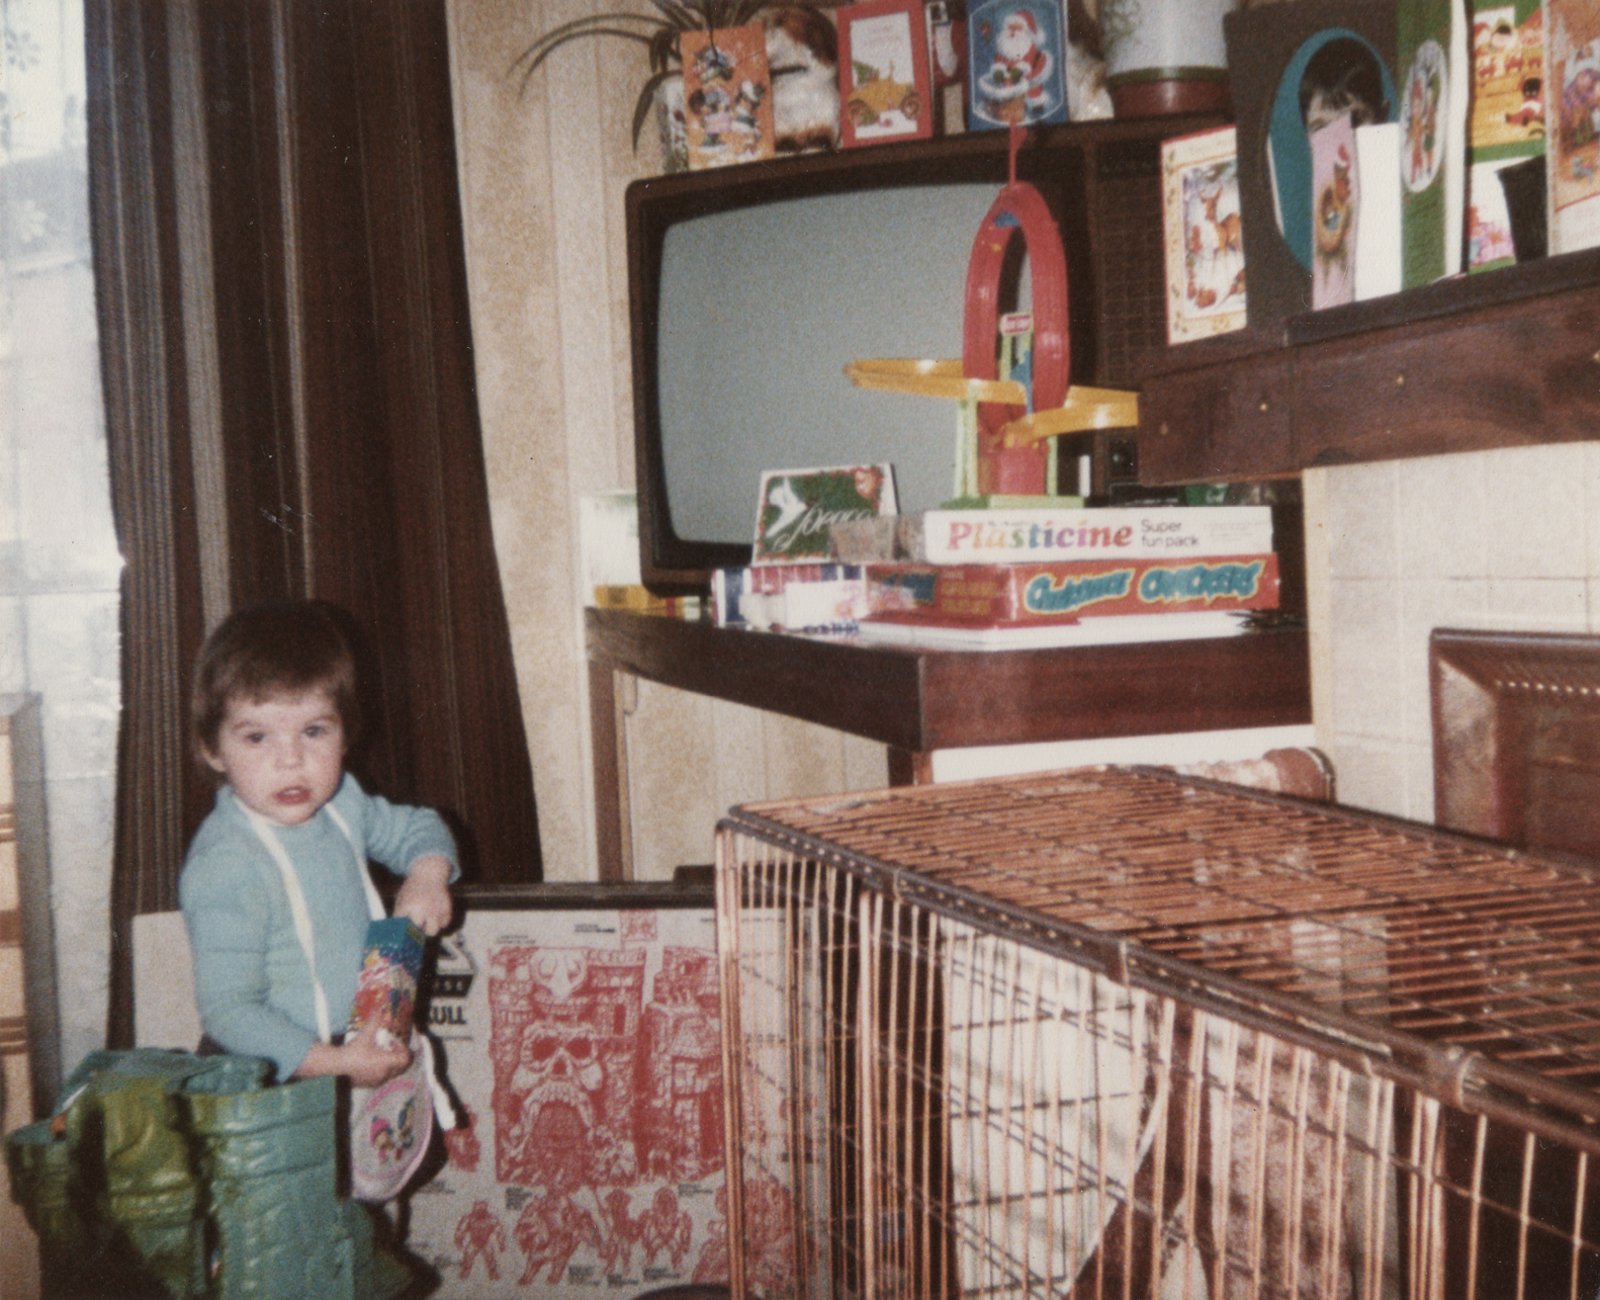 Lisa Crowne as a child, playing at the family home on the Strathroy Housing Estate in Omagh, 1984.